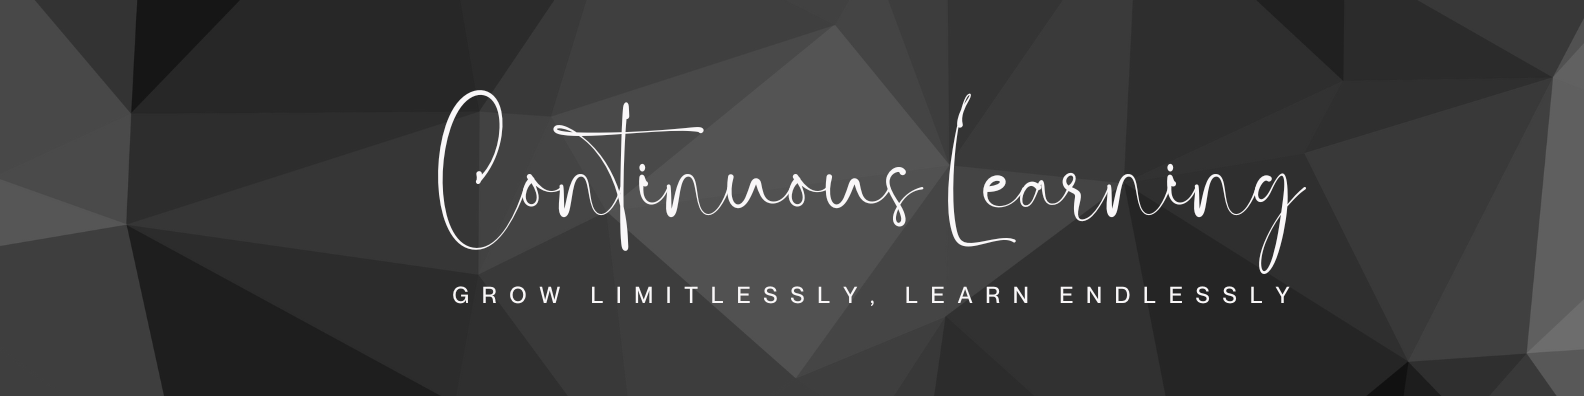 continuous learning banner 